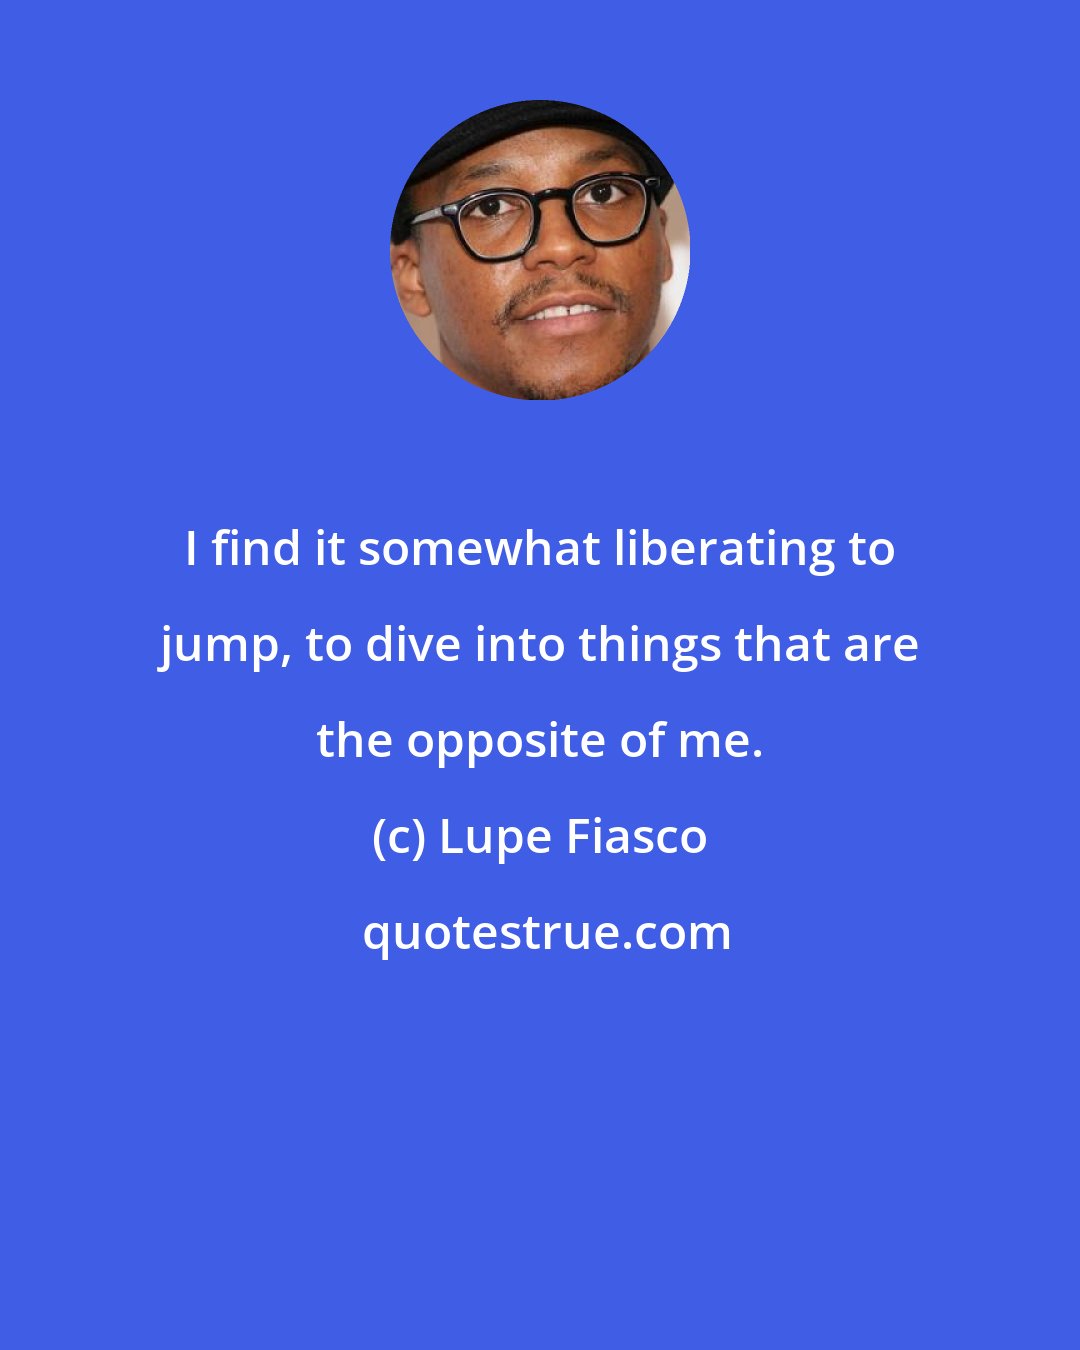 Lupe Fiasco: I find it somewhat liberating to jump, to dive into things that are the opposite of me.